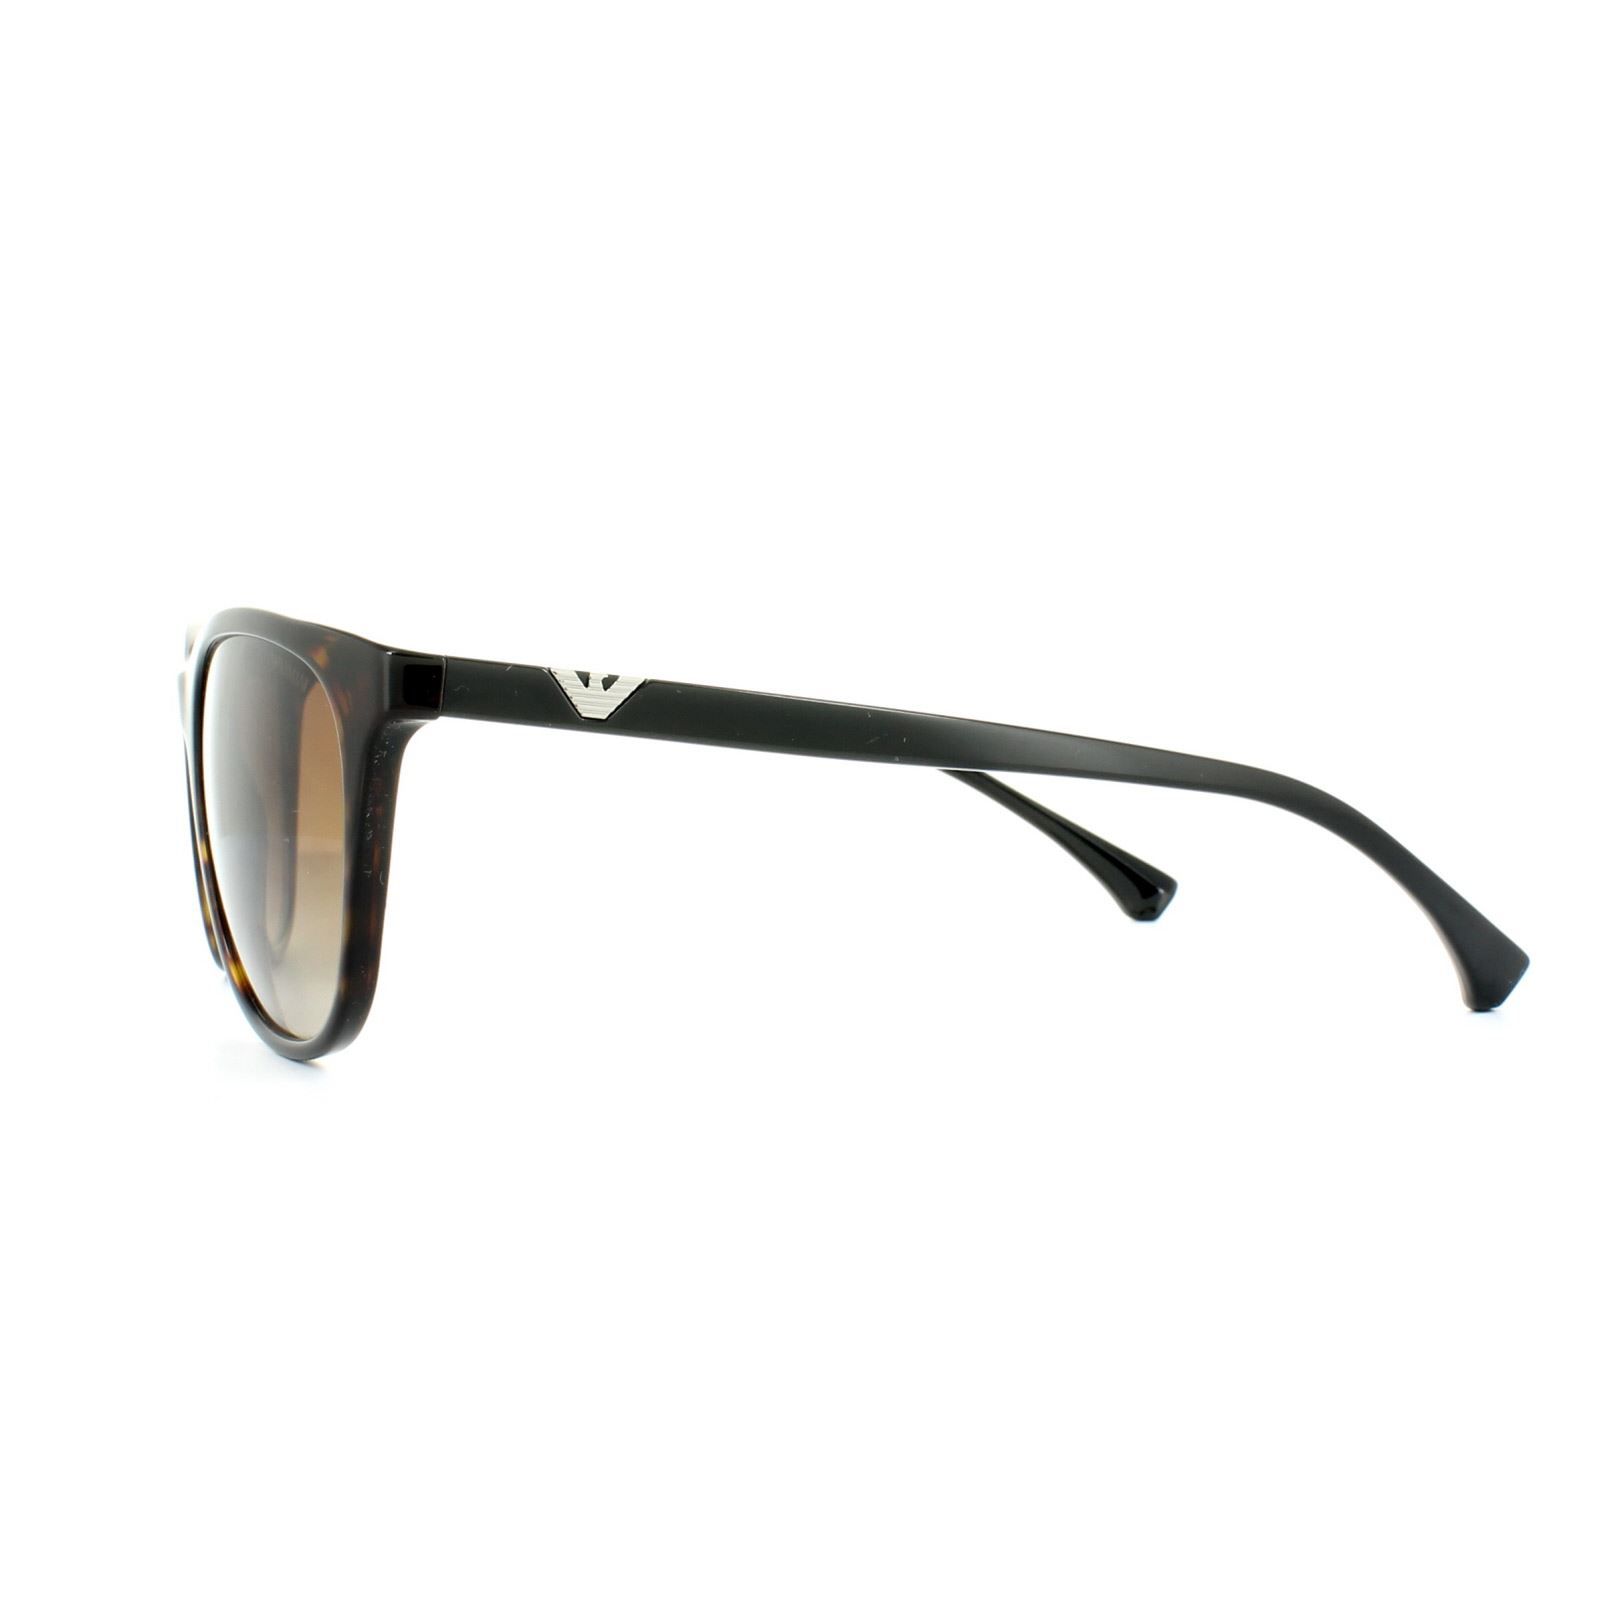 Emporio Armani Sunglasses 4086 5026/13 Dark Havana Brown Gradient are a lightweight square shaped acetate frame with minimalist styling for a sleek smooth look that will look great for all occasions. A simple Armani eagle logo on the temples adds authenticity.